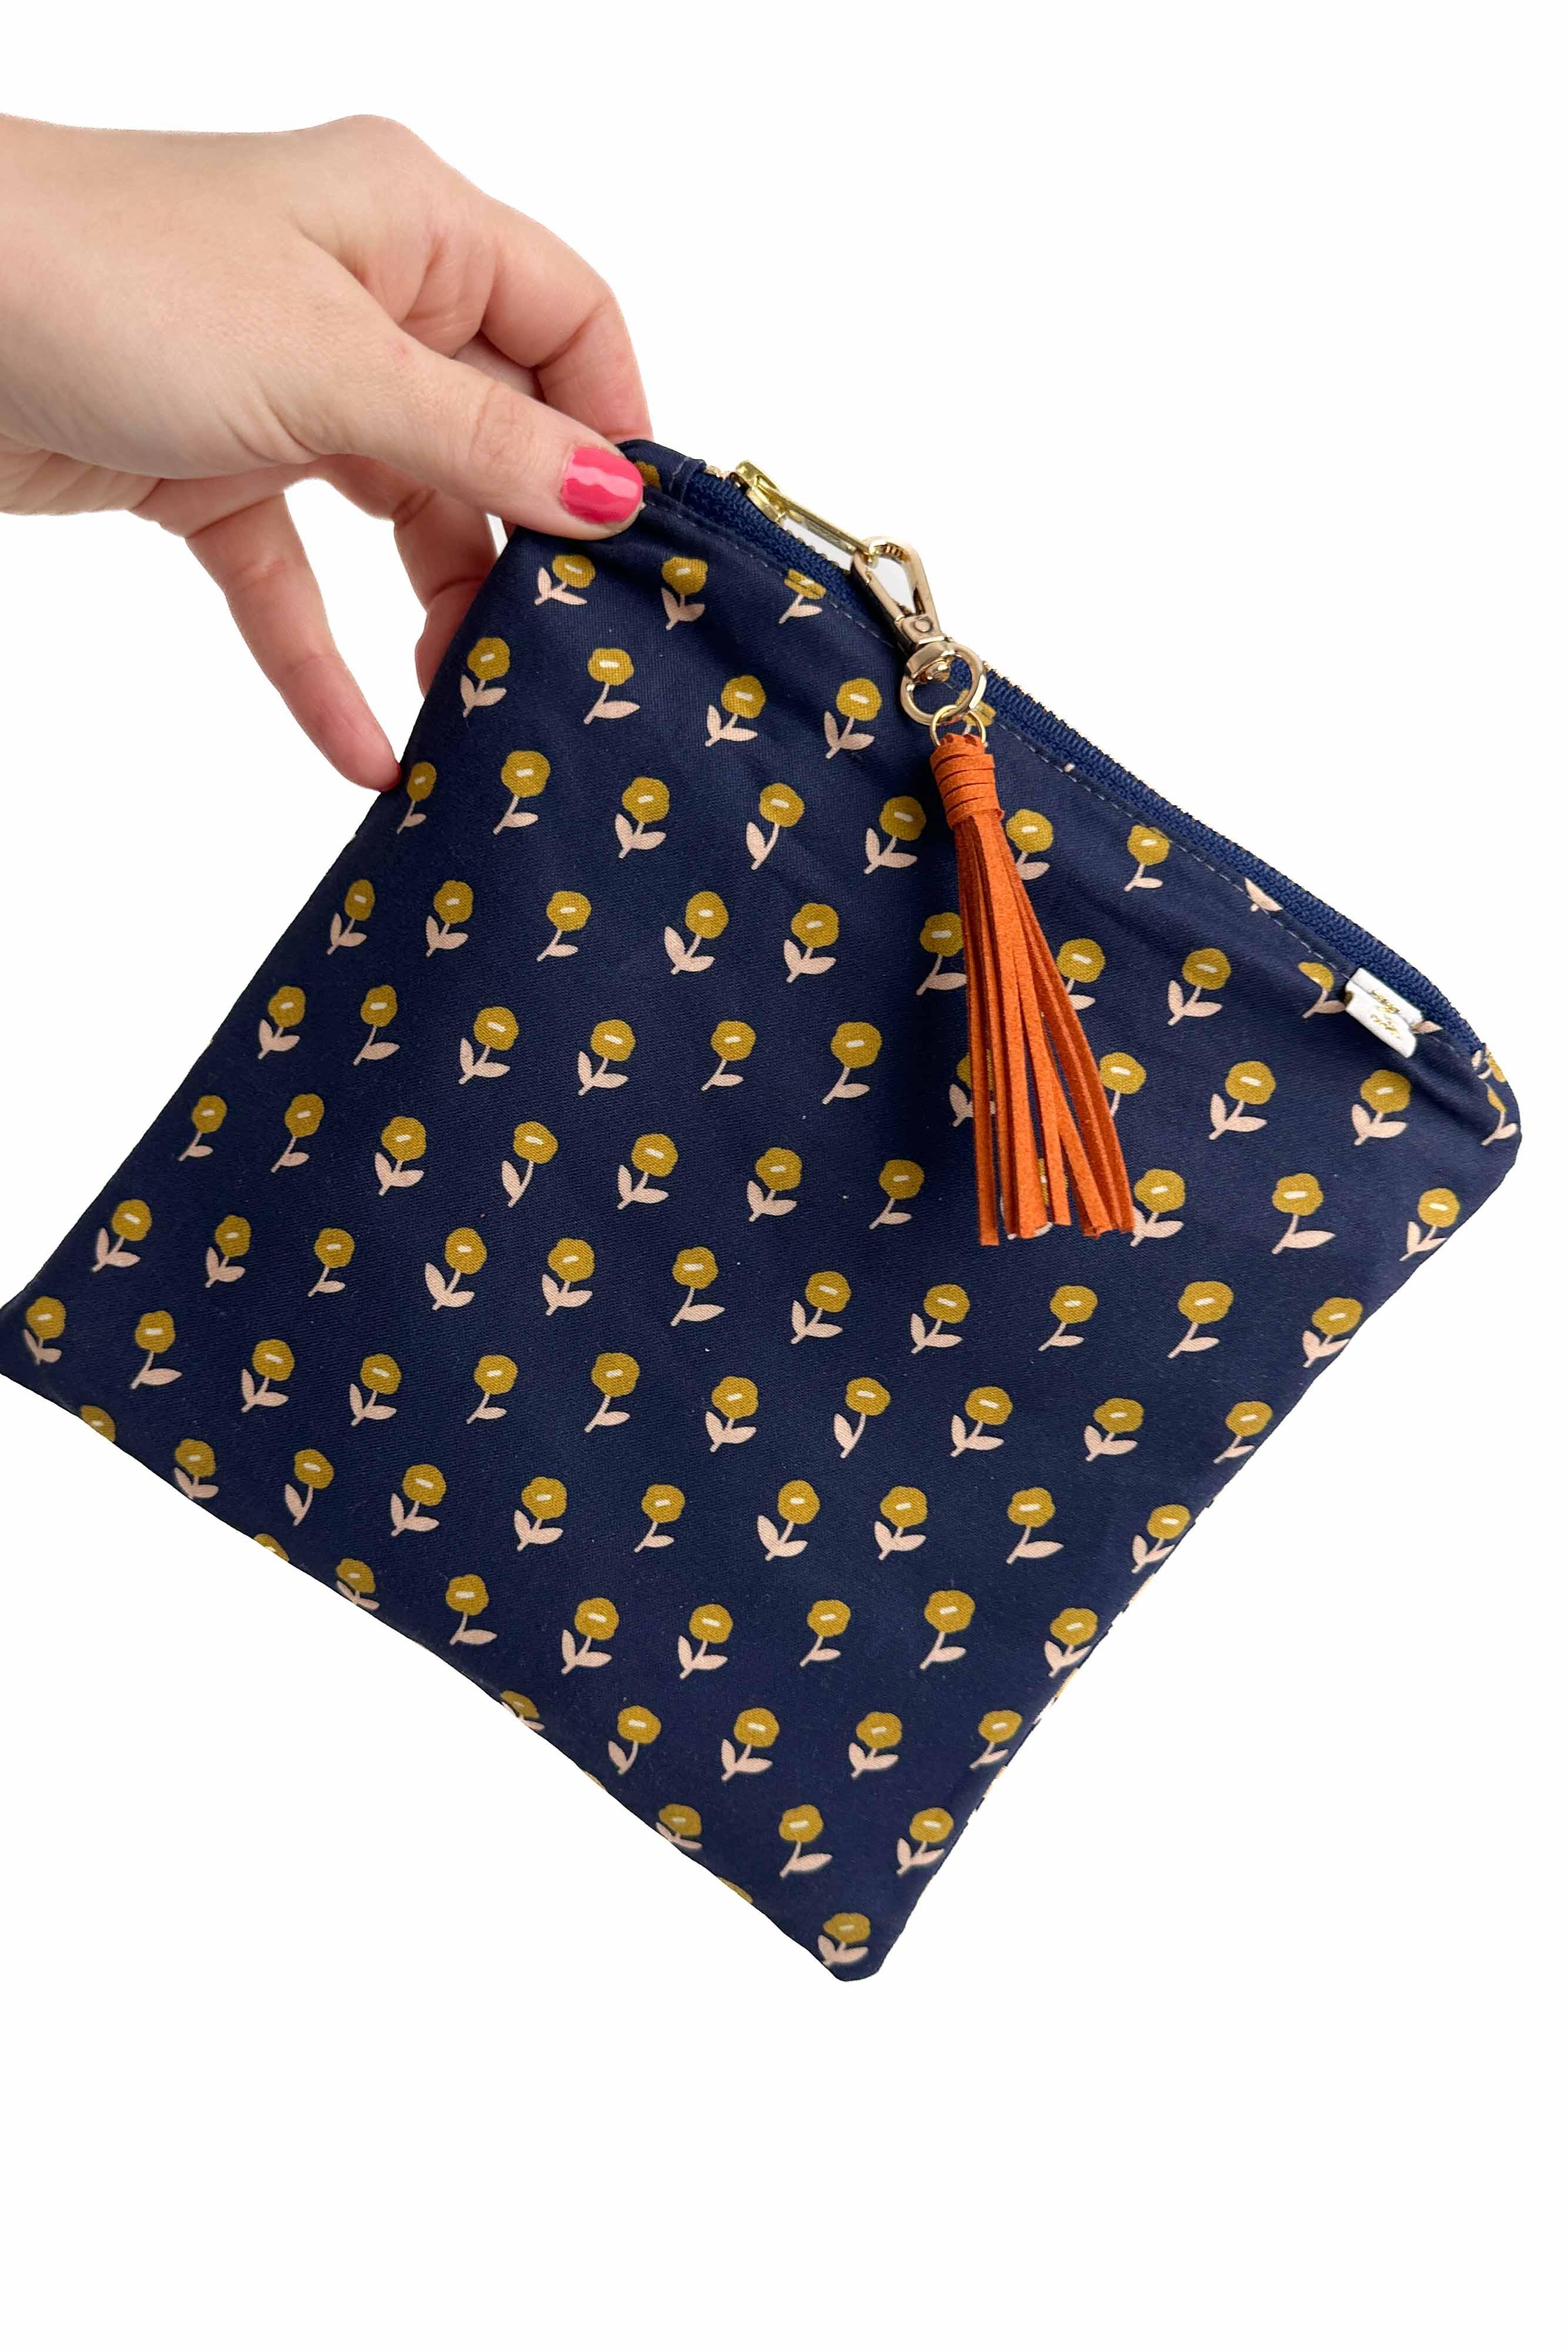 Simply Golden Small Wet Bag READY TO SHIP - Modern Makerie